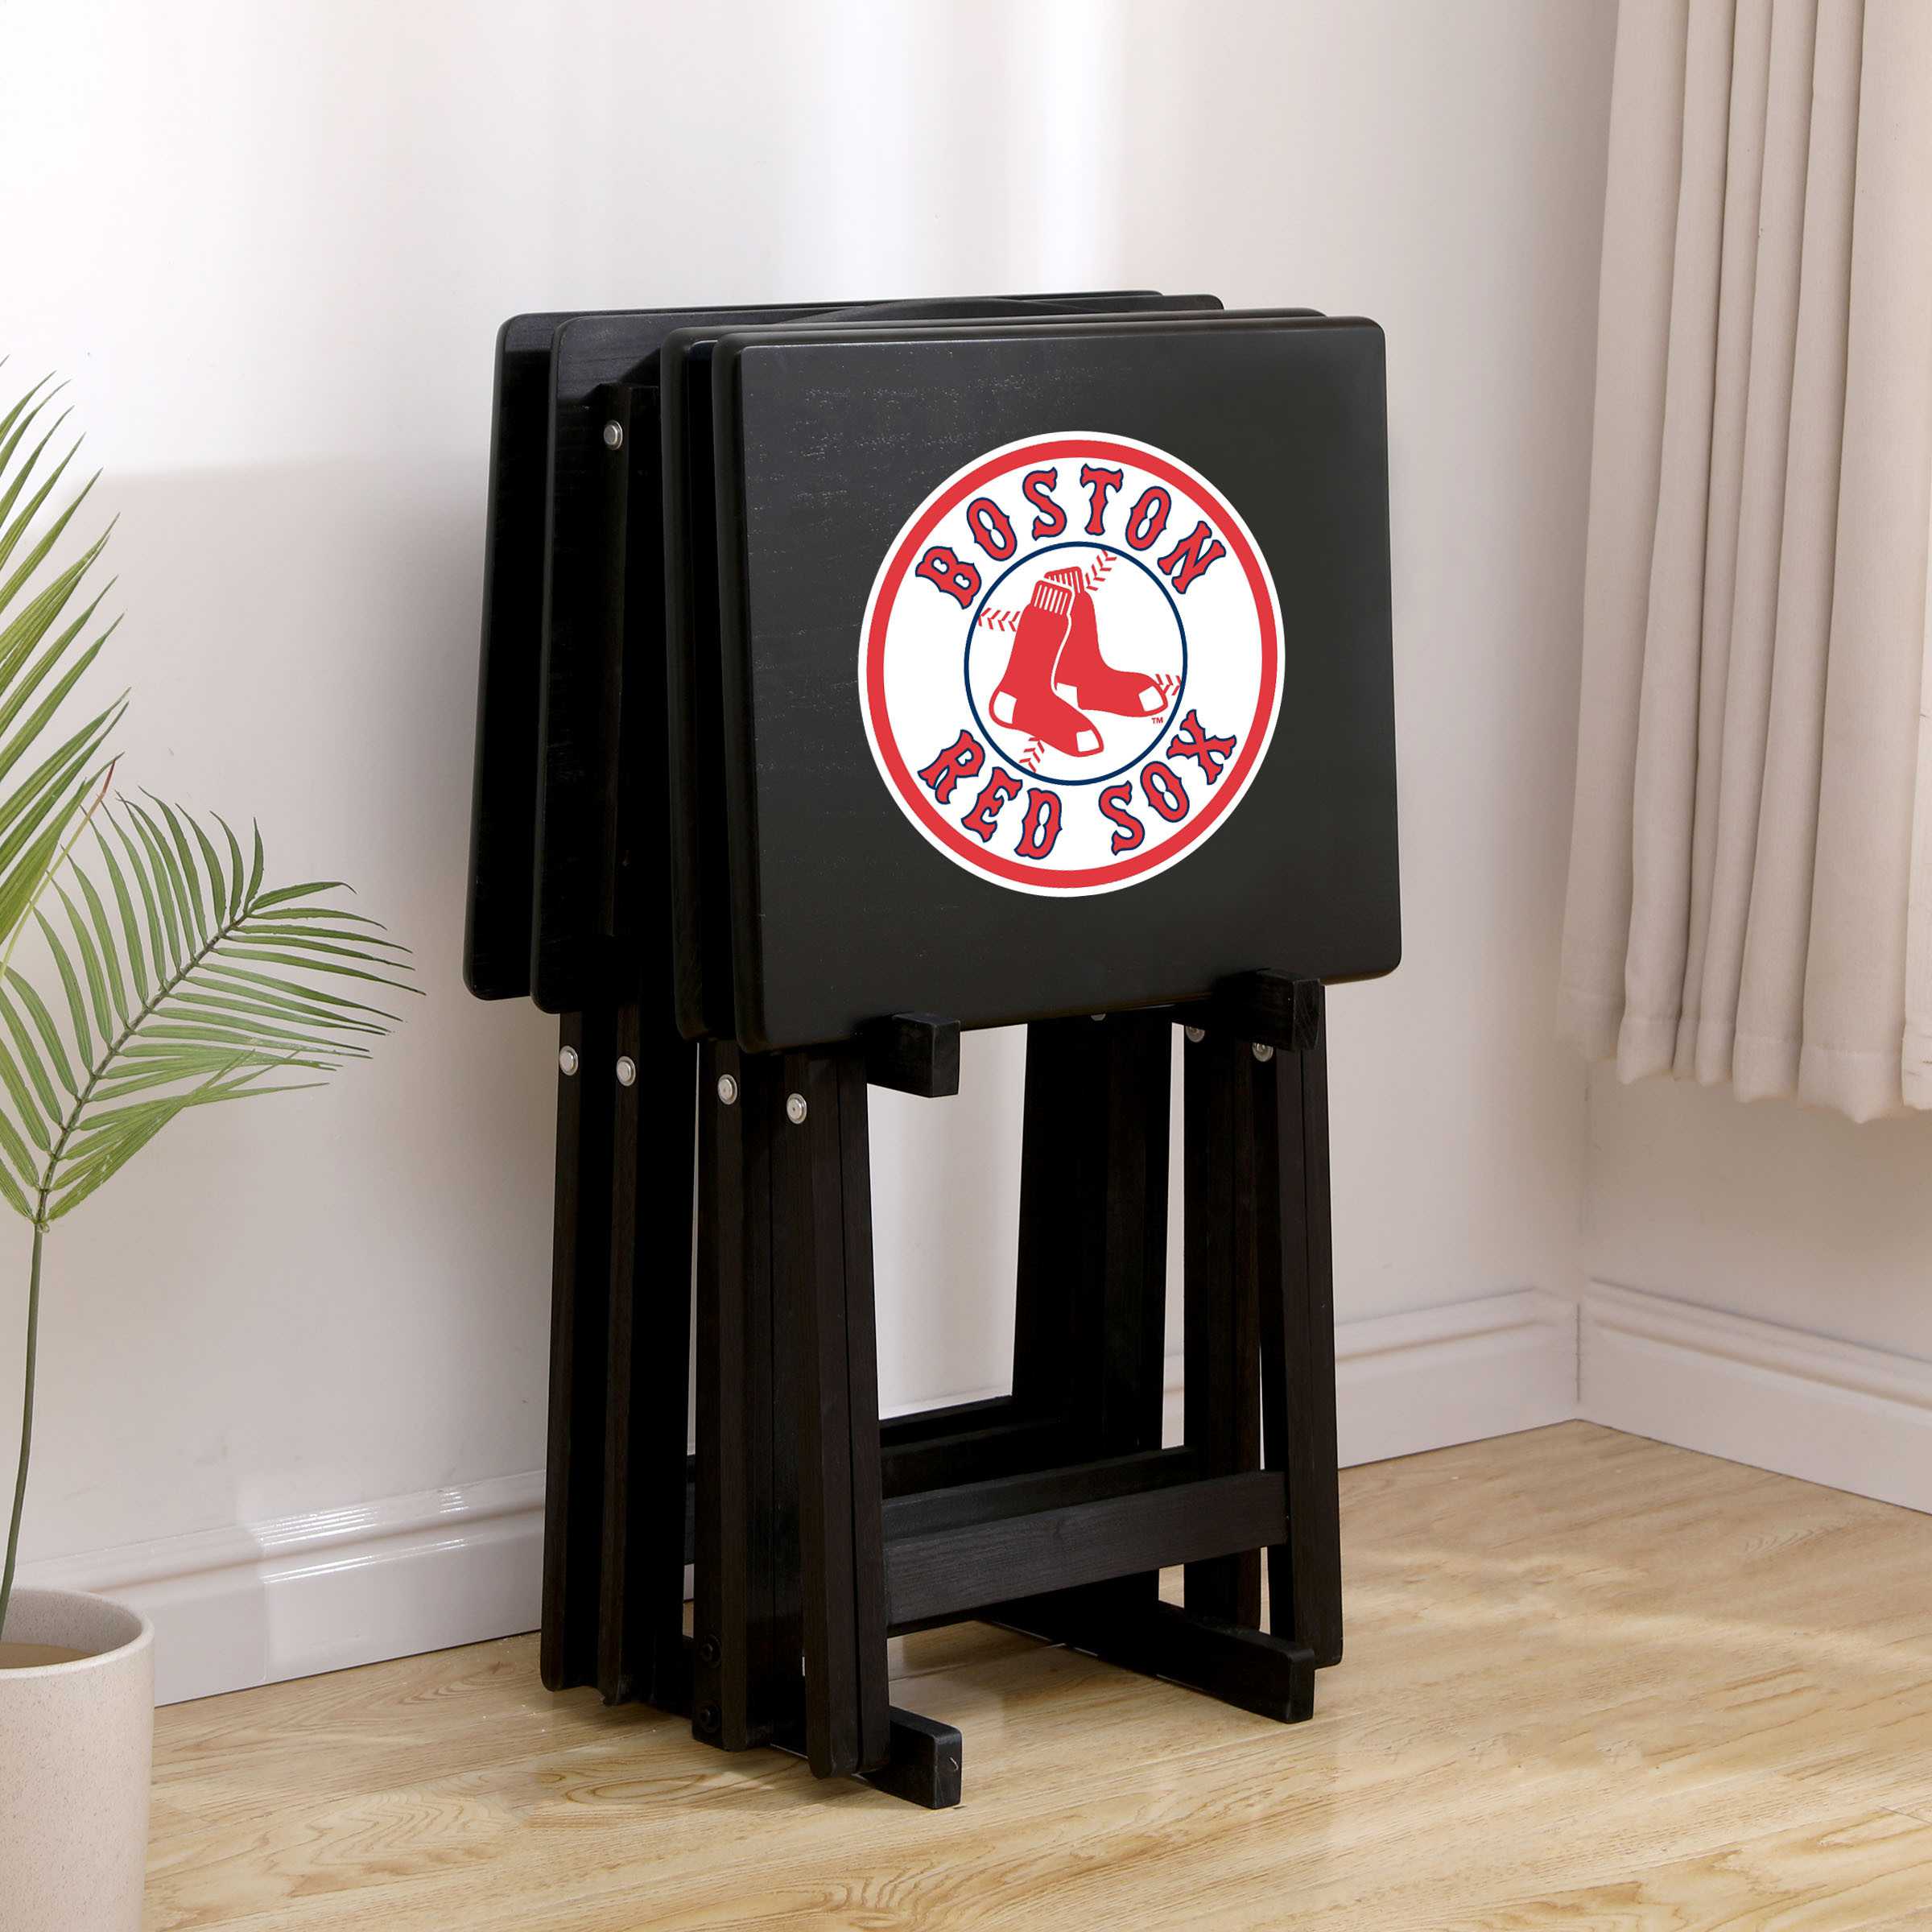 BOSTON RED SOX 4 TV TRAYS WITH STAND